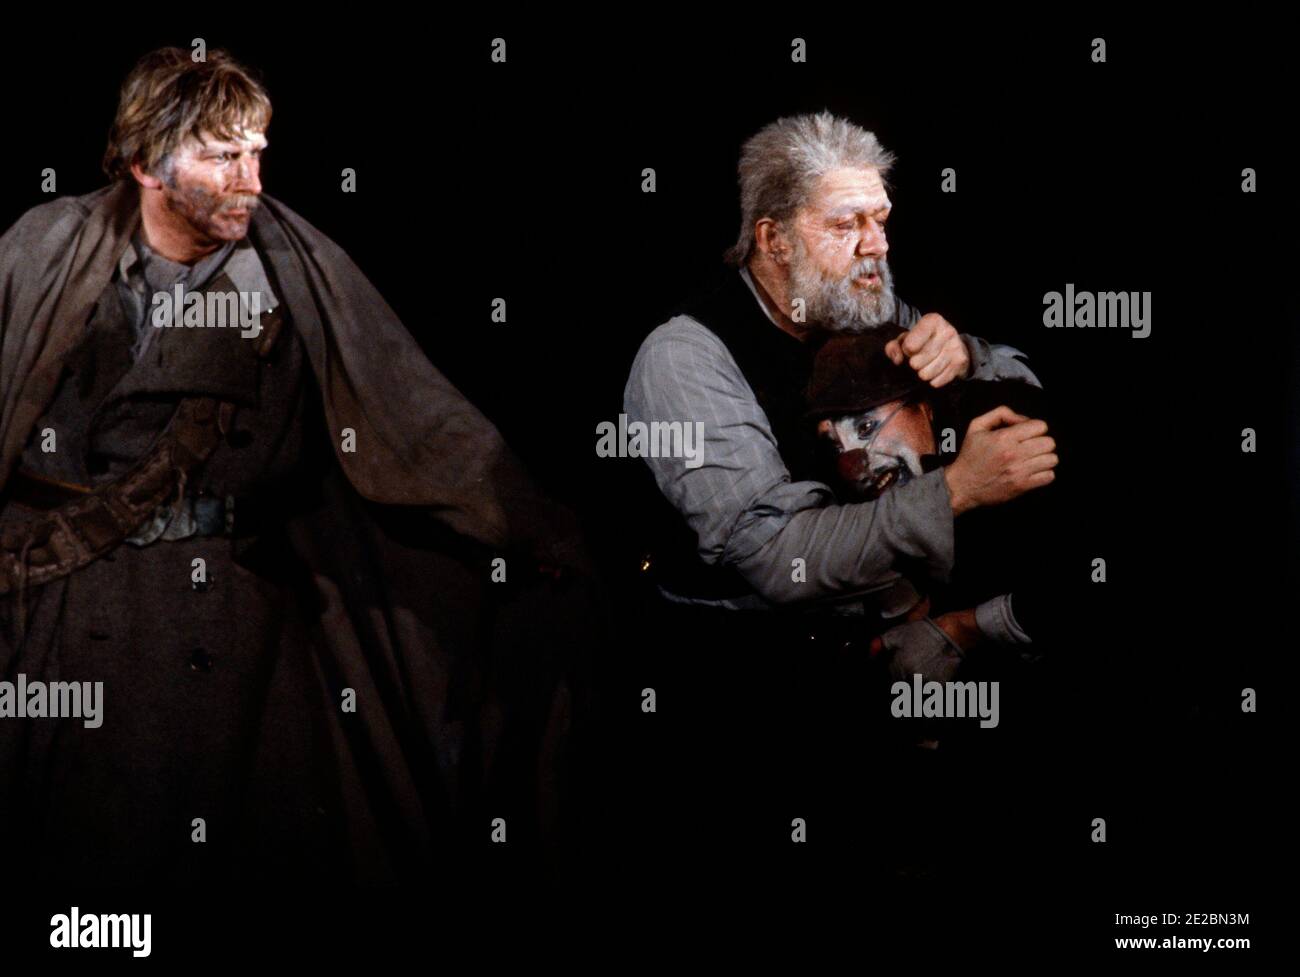 l-r: Malcolm Storry (Earl of Kent), Michael Gambon (King Lear), Antony Sher (Lear's Fool) in KING LEAR by Shakespeare at the Royal Shakespeare Company (RSC), Barbican Theatre, London EC2  31/05/1983  design: Bob Crowley  lighting: Brian Harris  fights: Malcolm Ranson  director: Adrian Noble Stock Photo